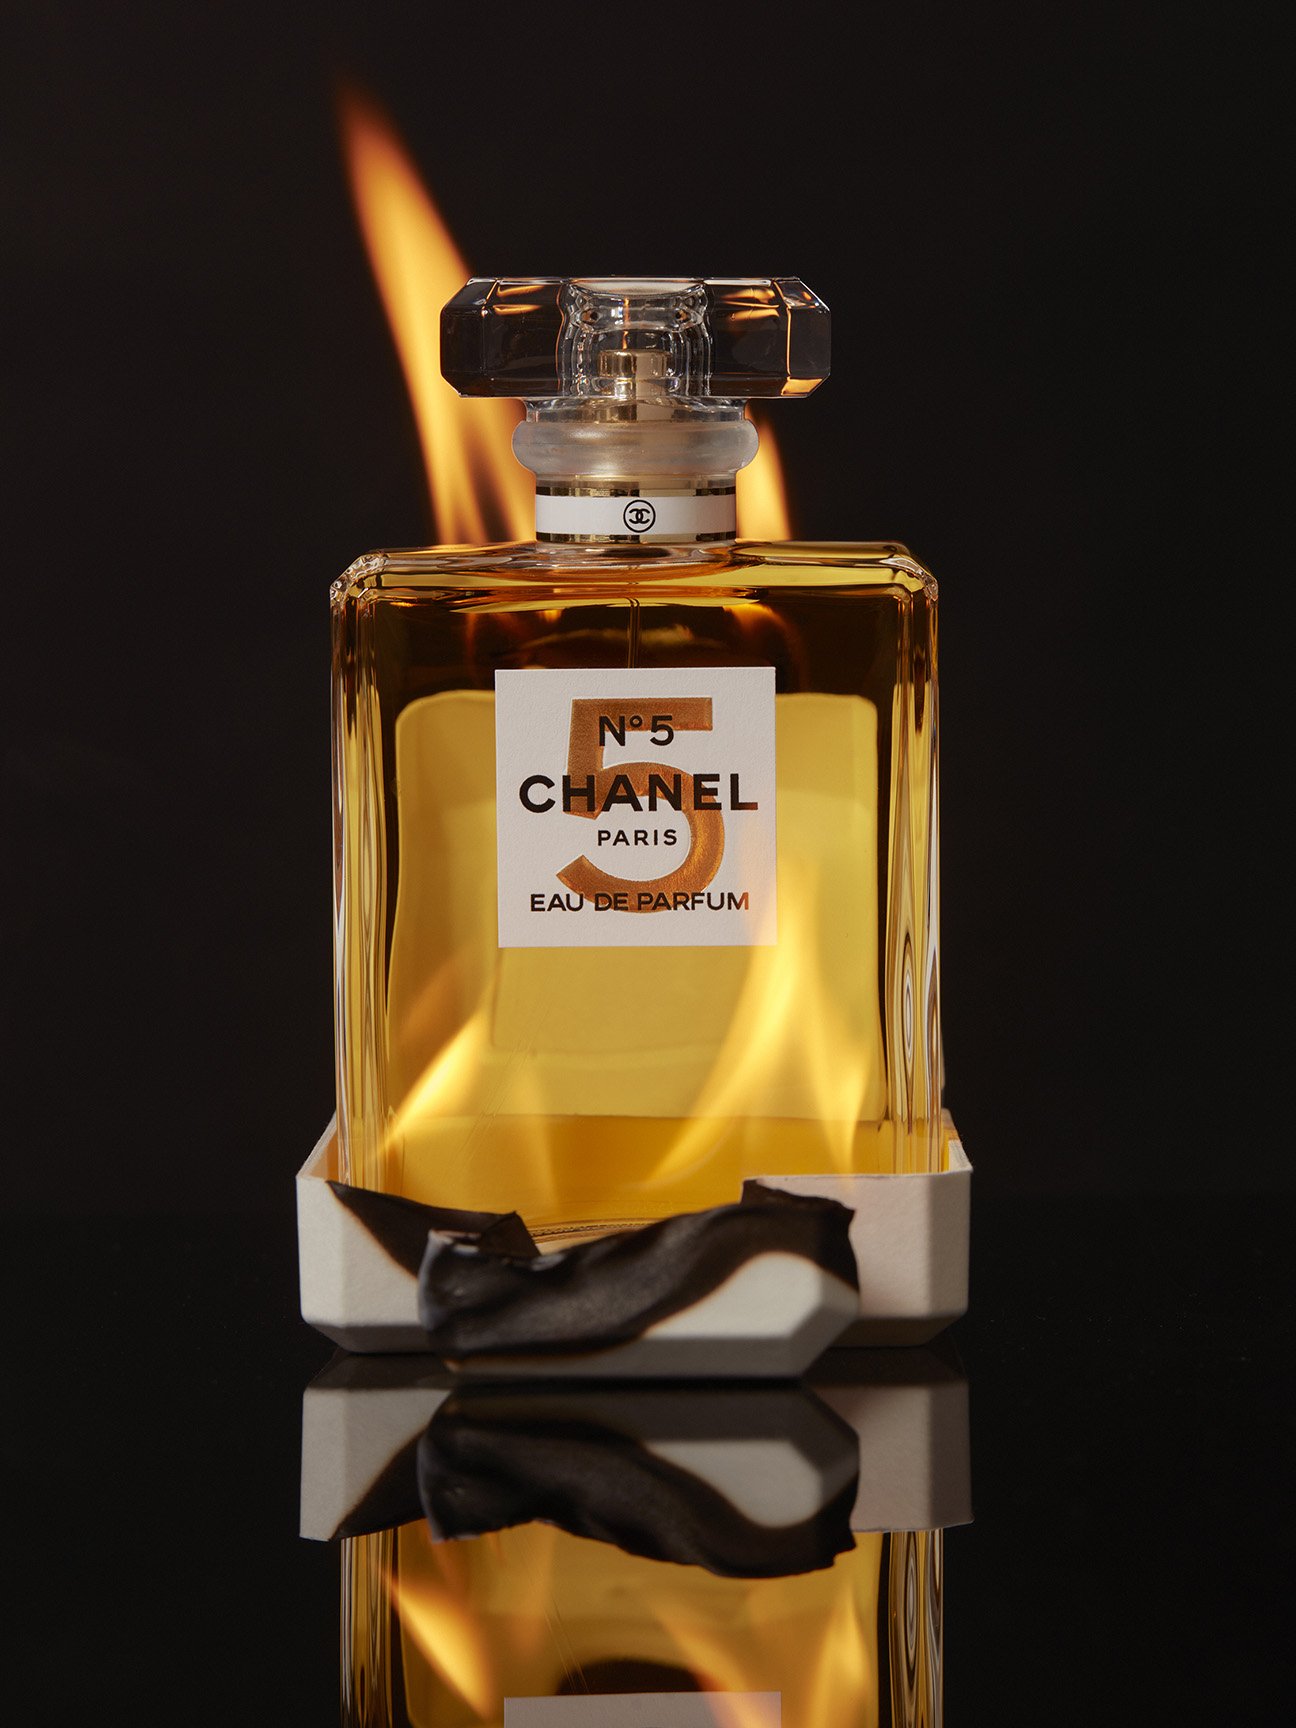 Commissioned / Homme Girls - Chanel No. 5 — David Brandon Geeting